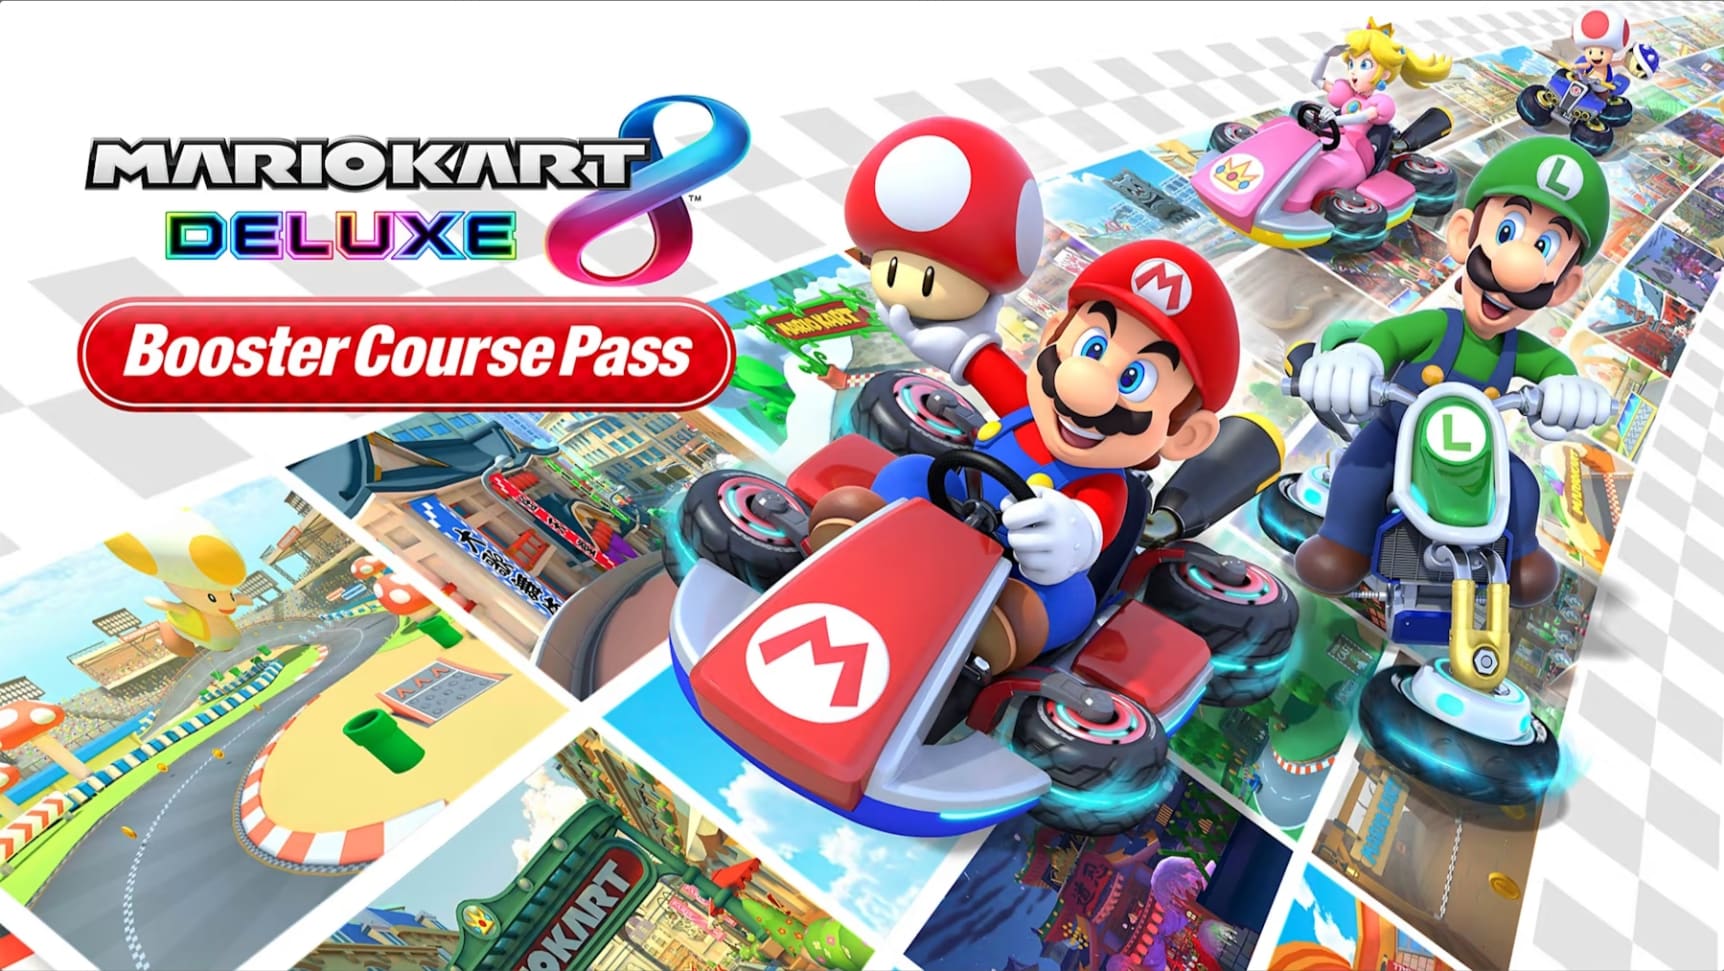 Mario Kart 8 Deluxe: Booster Course Pack